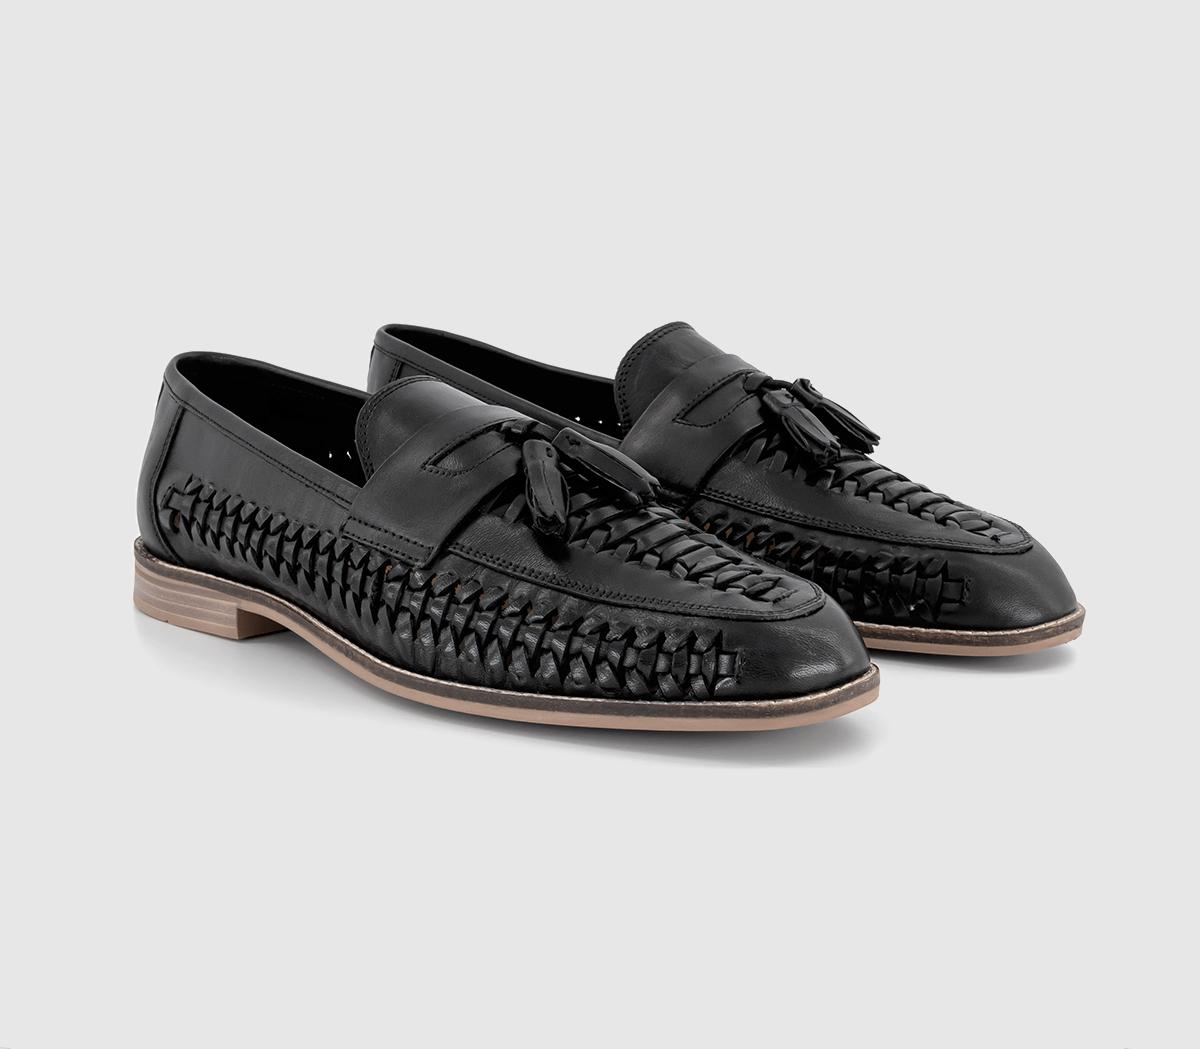 OFFICE Mens Clapham Tassel Woven Loafers Black Leather, 7